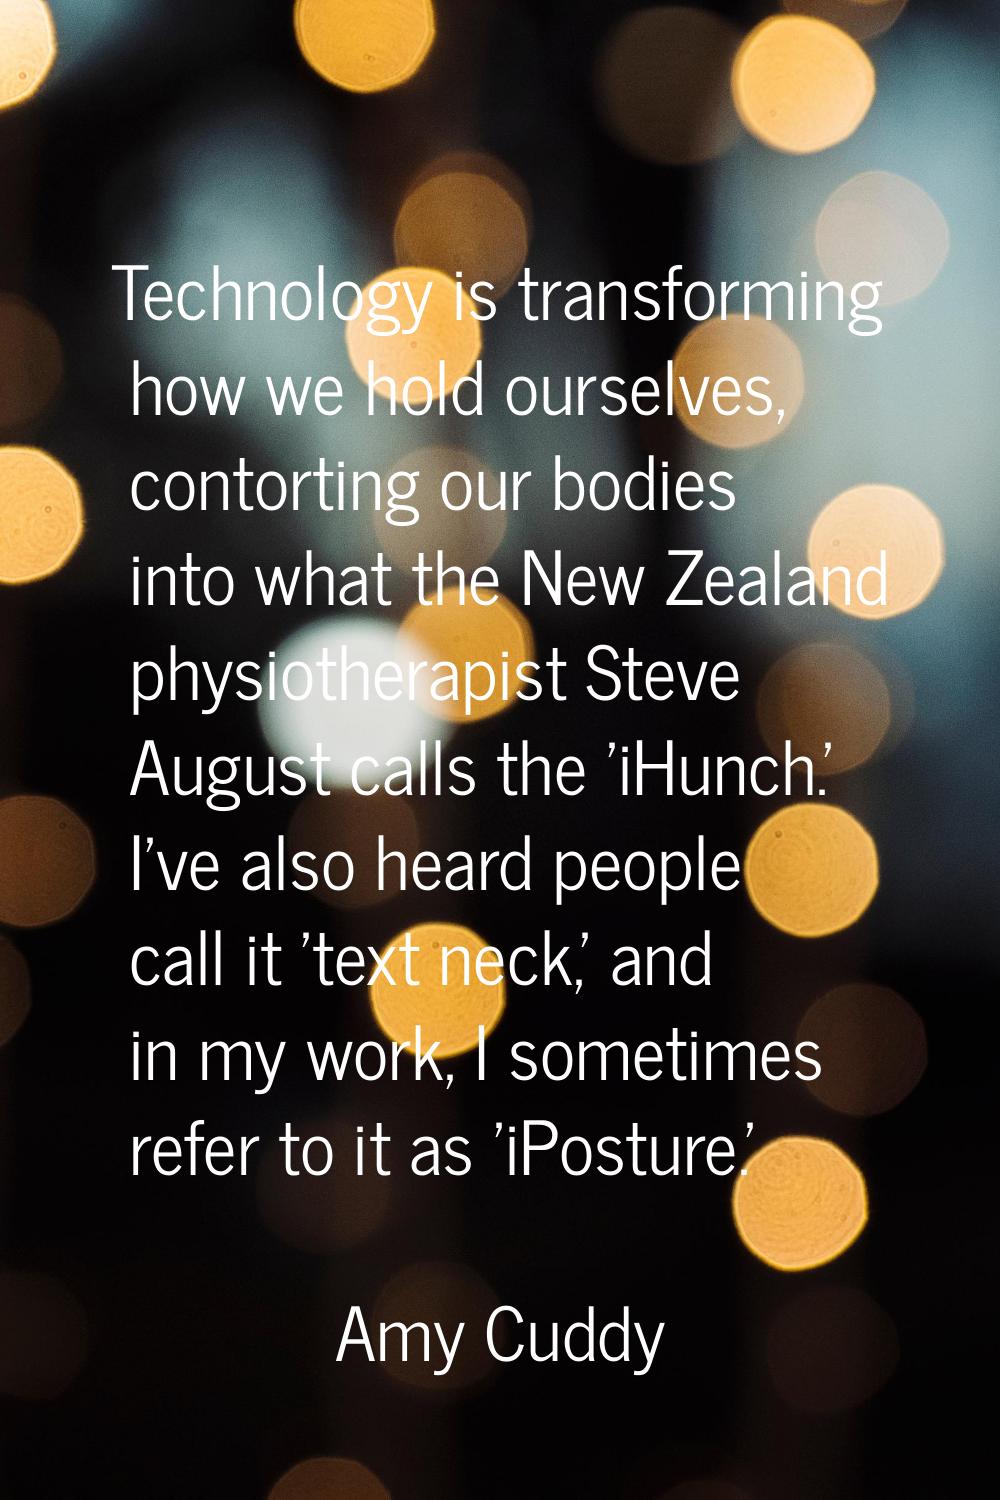 Technology is transforming how we hold ourselves, contorting our bodies into what the New Zealand p